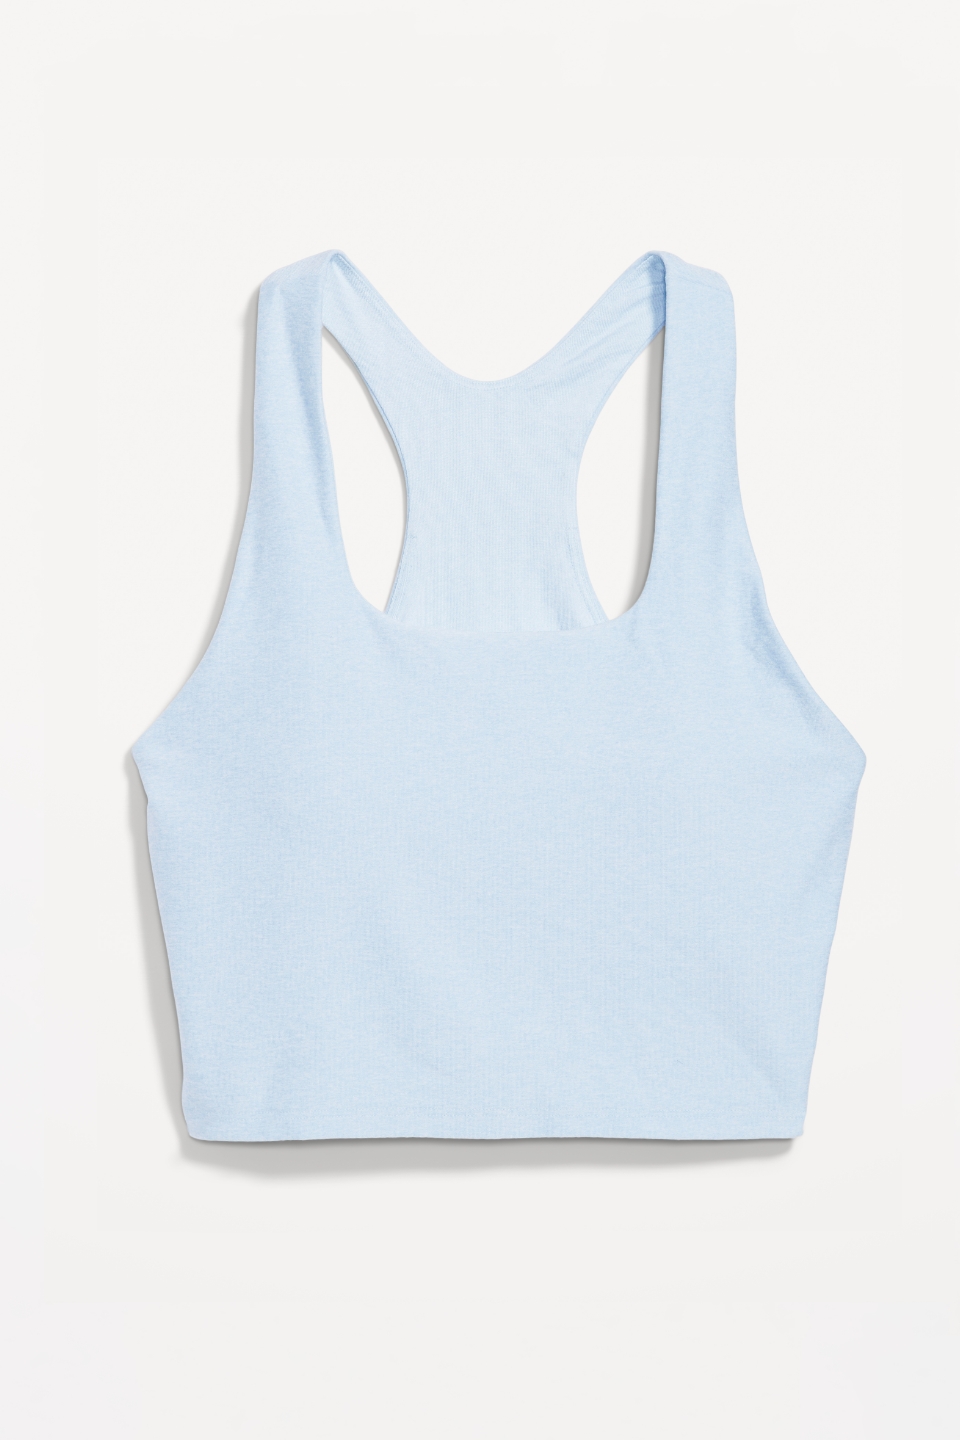 Blue Exercise Shirts for Women for sale